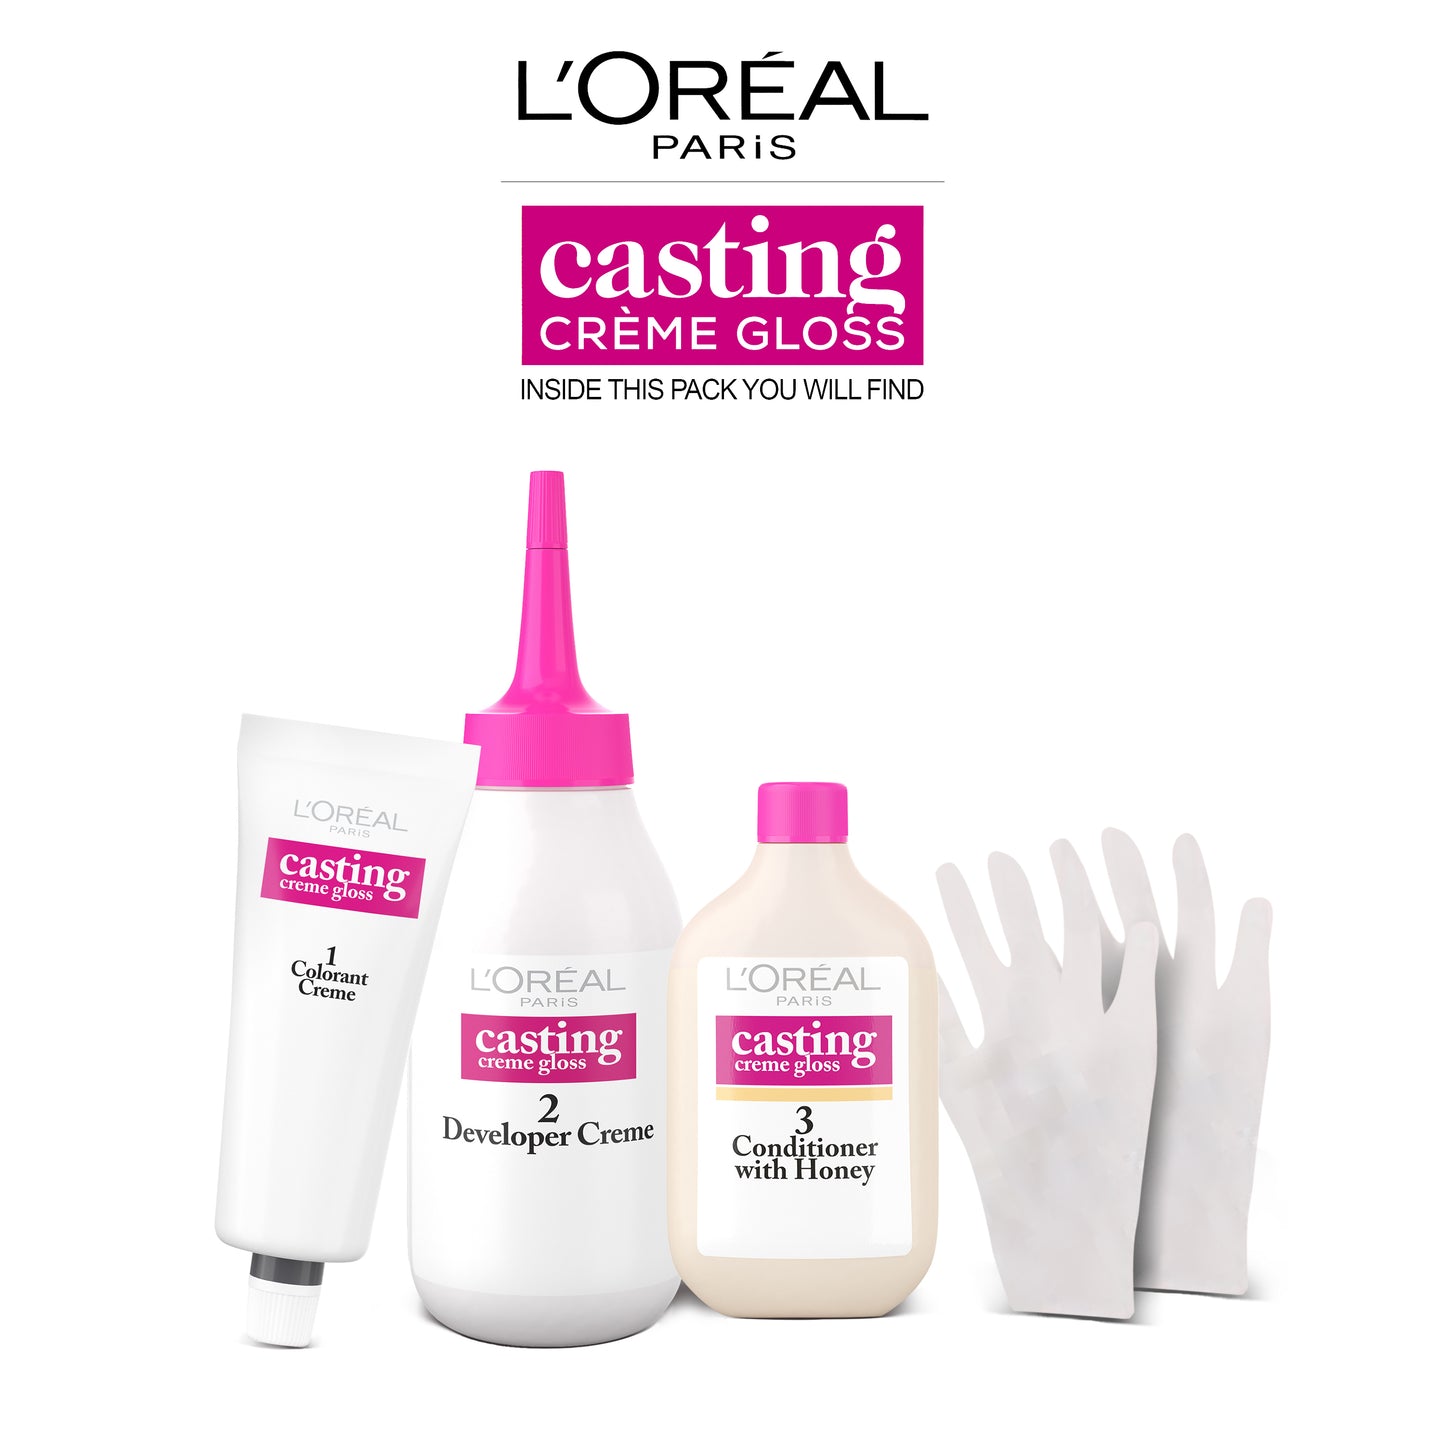 L'Oreal Casting Creme Gloss Hair Color 360 Dark Red